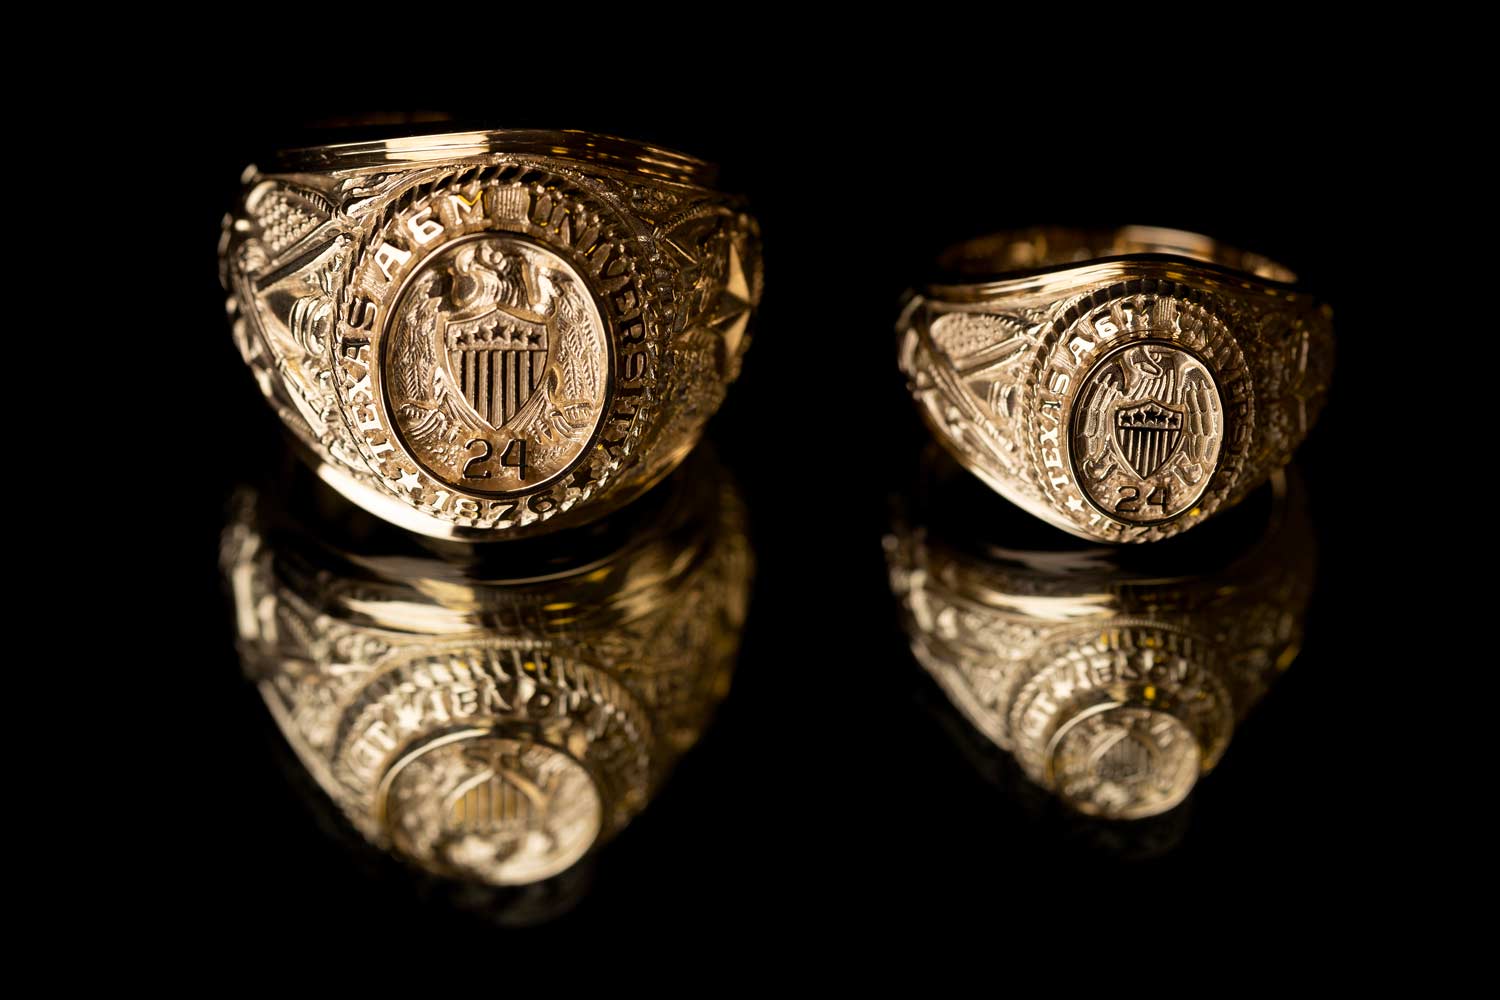 Two Aggie Rings sit side by side, comparing the size of the mens and womens rings